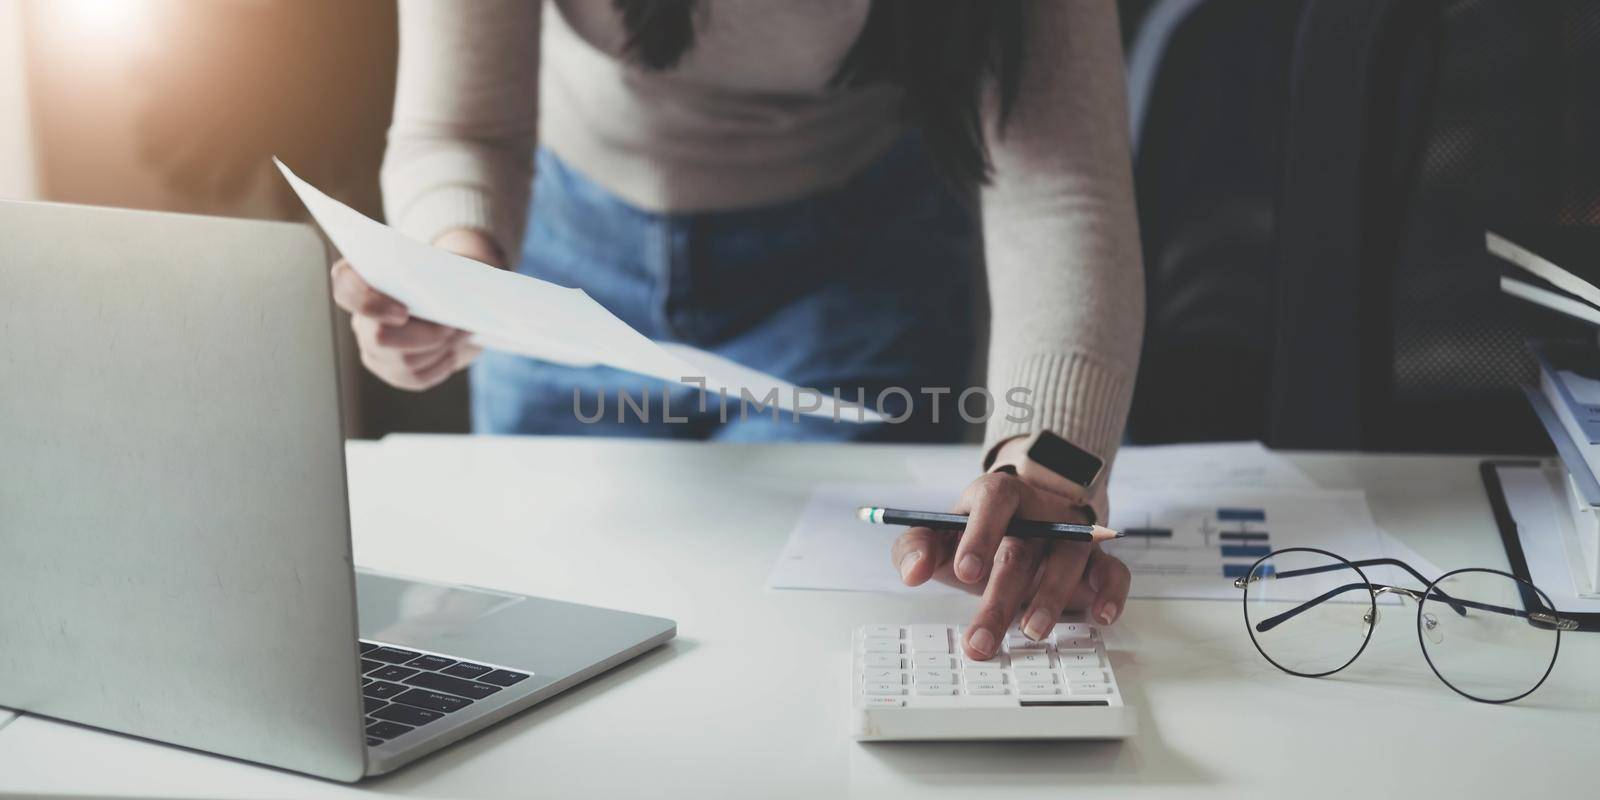 Finance Concept. Woman hold a graph pen, press a calculator and make money by writing reports, and memos, and analyzing business documents with a laptop computer vertically. by wichayada